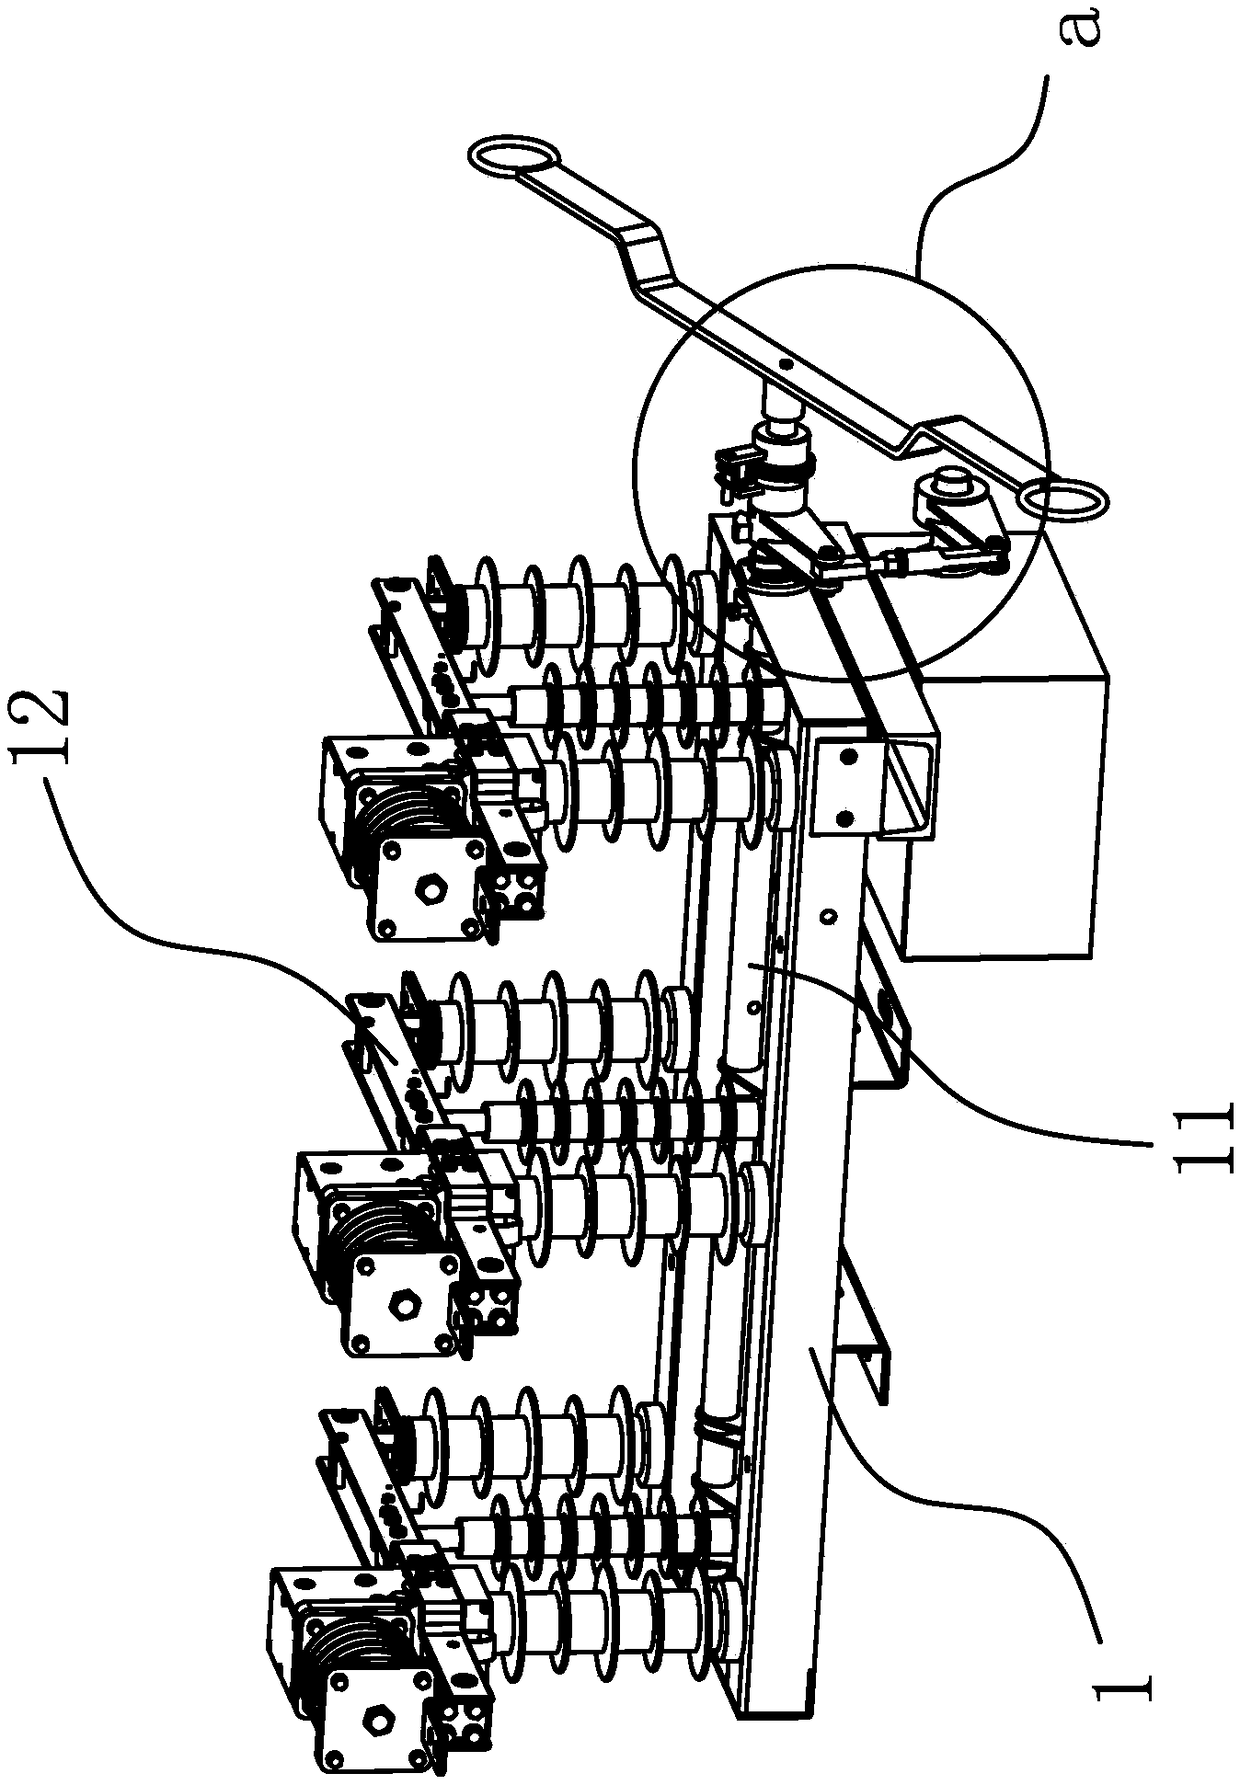 Operation mechanism of high-voltage vacuum load switch